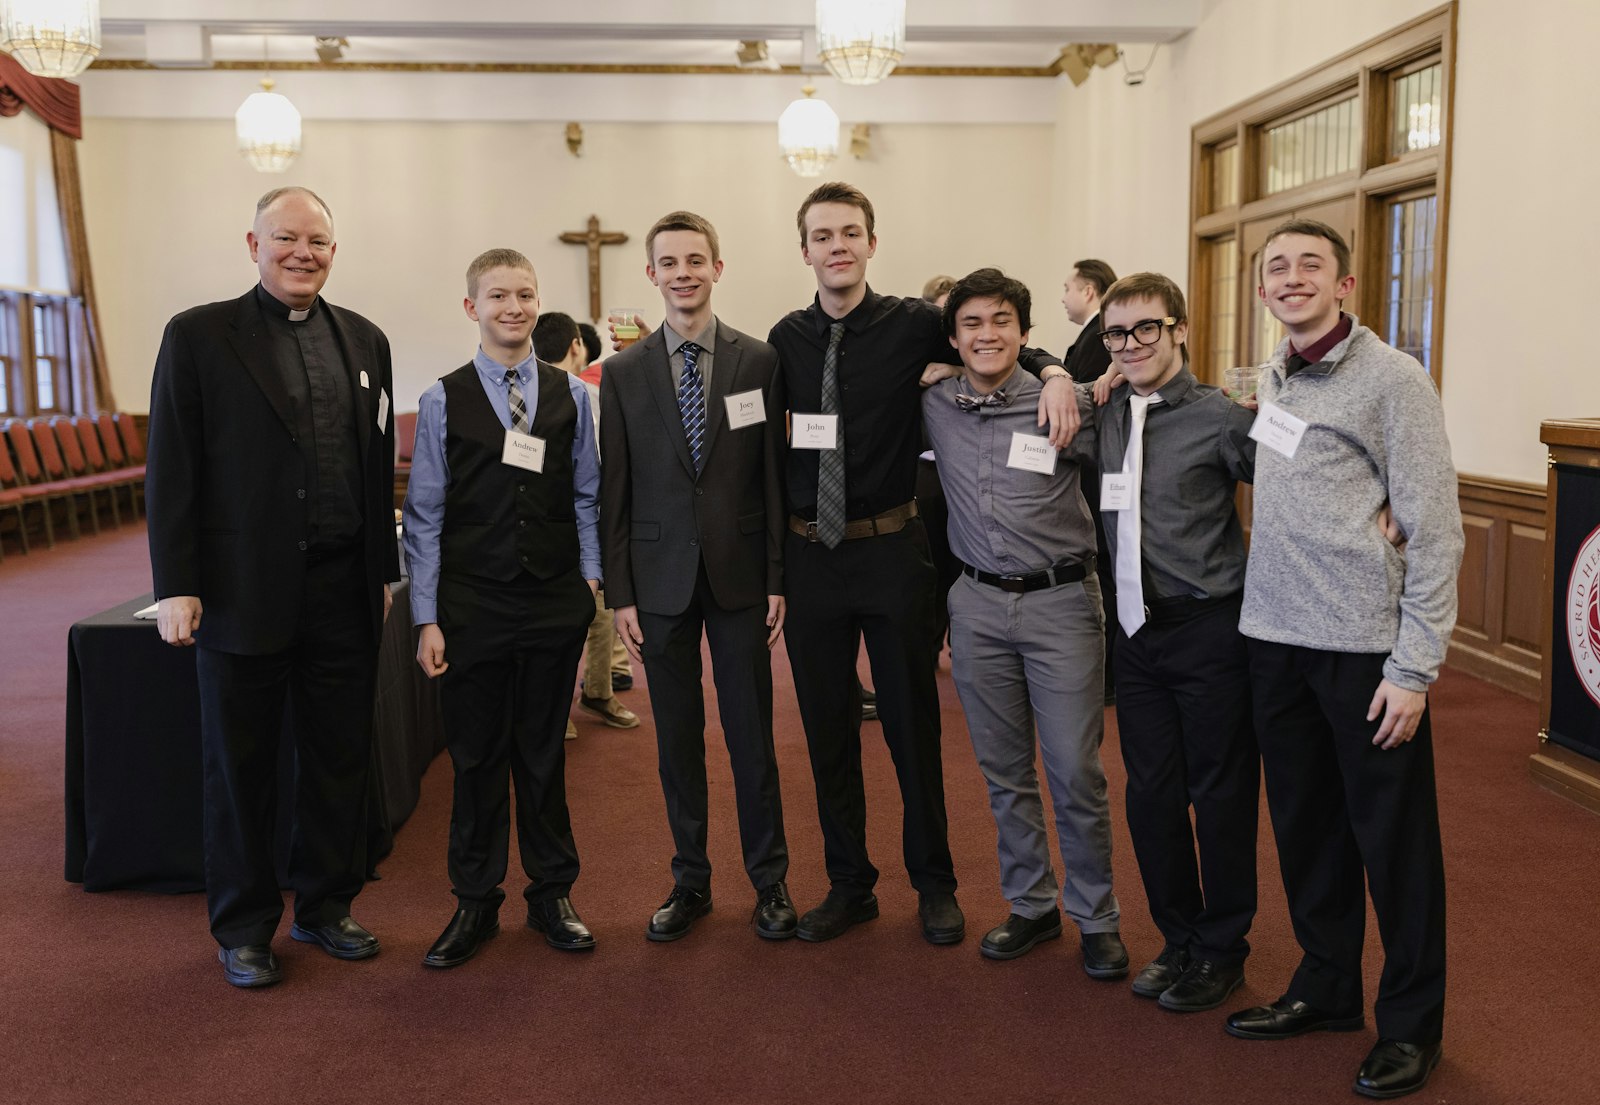 Fr. Tony Richter of Guardian Angels Parish in Clawson stands with the young men of the parish who attended the Feb. 20 evening prayer and dinner at the seminary.